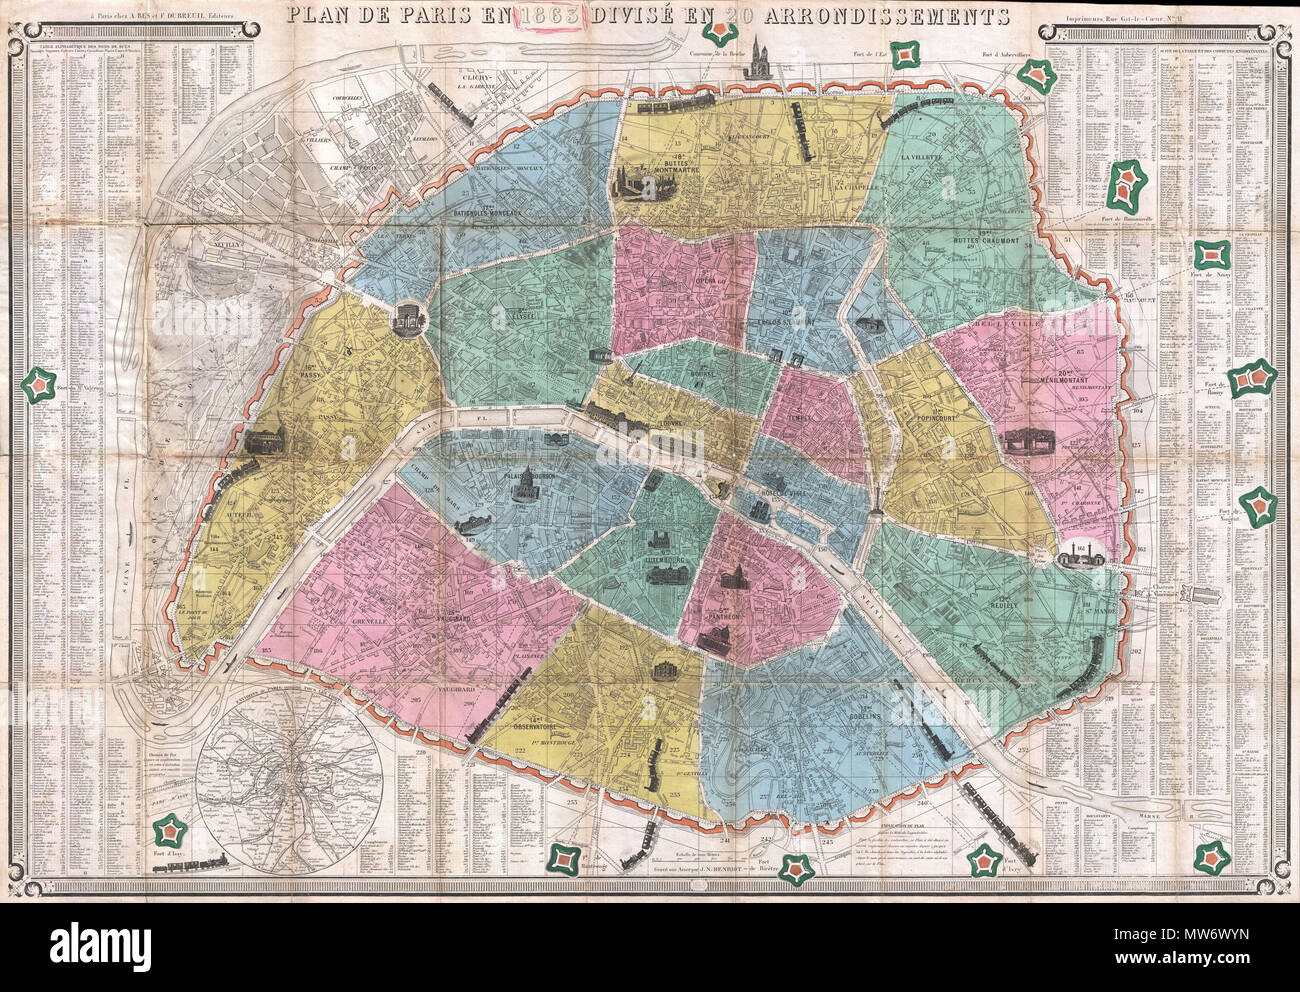 Plan de Paris en 1863 Divise en 20 Arrondissements. English: This is an  extremely attractive 1863 tourist pocket map of Paris, France. Covers the  old walled city of Paris and the